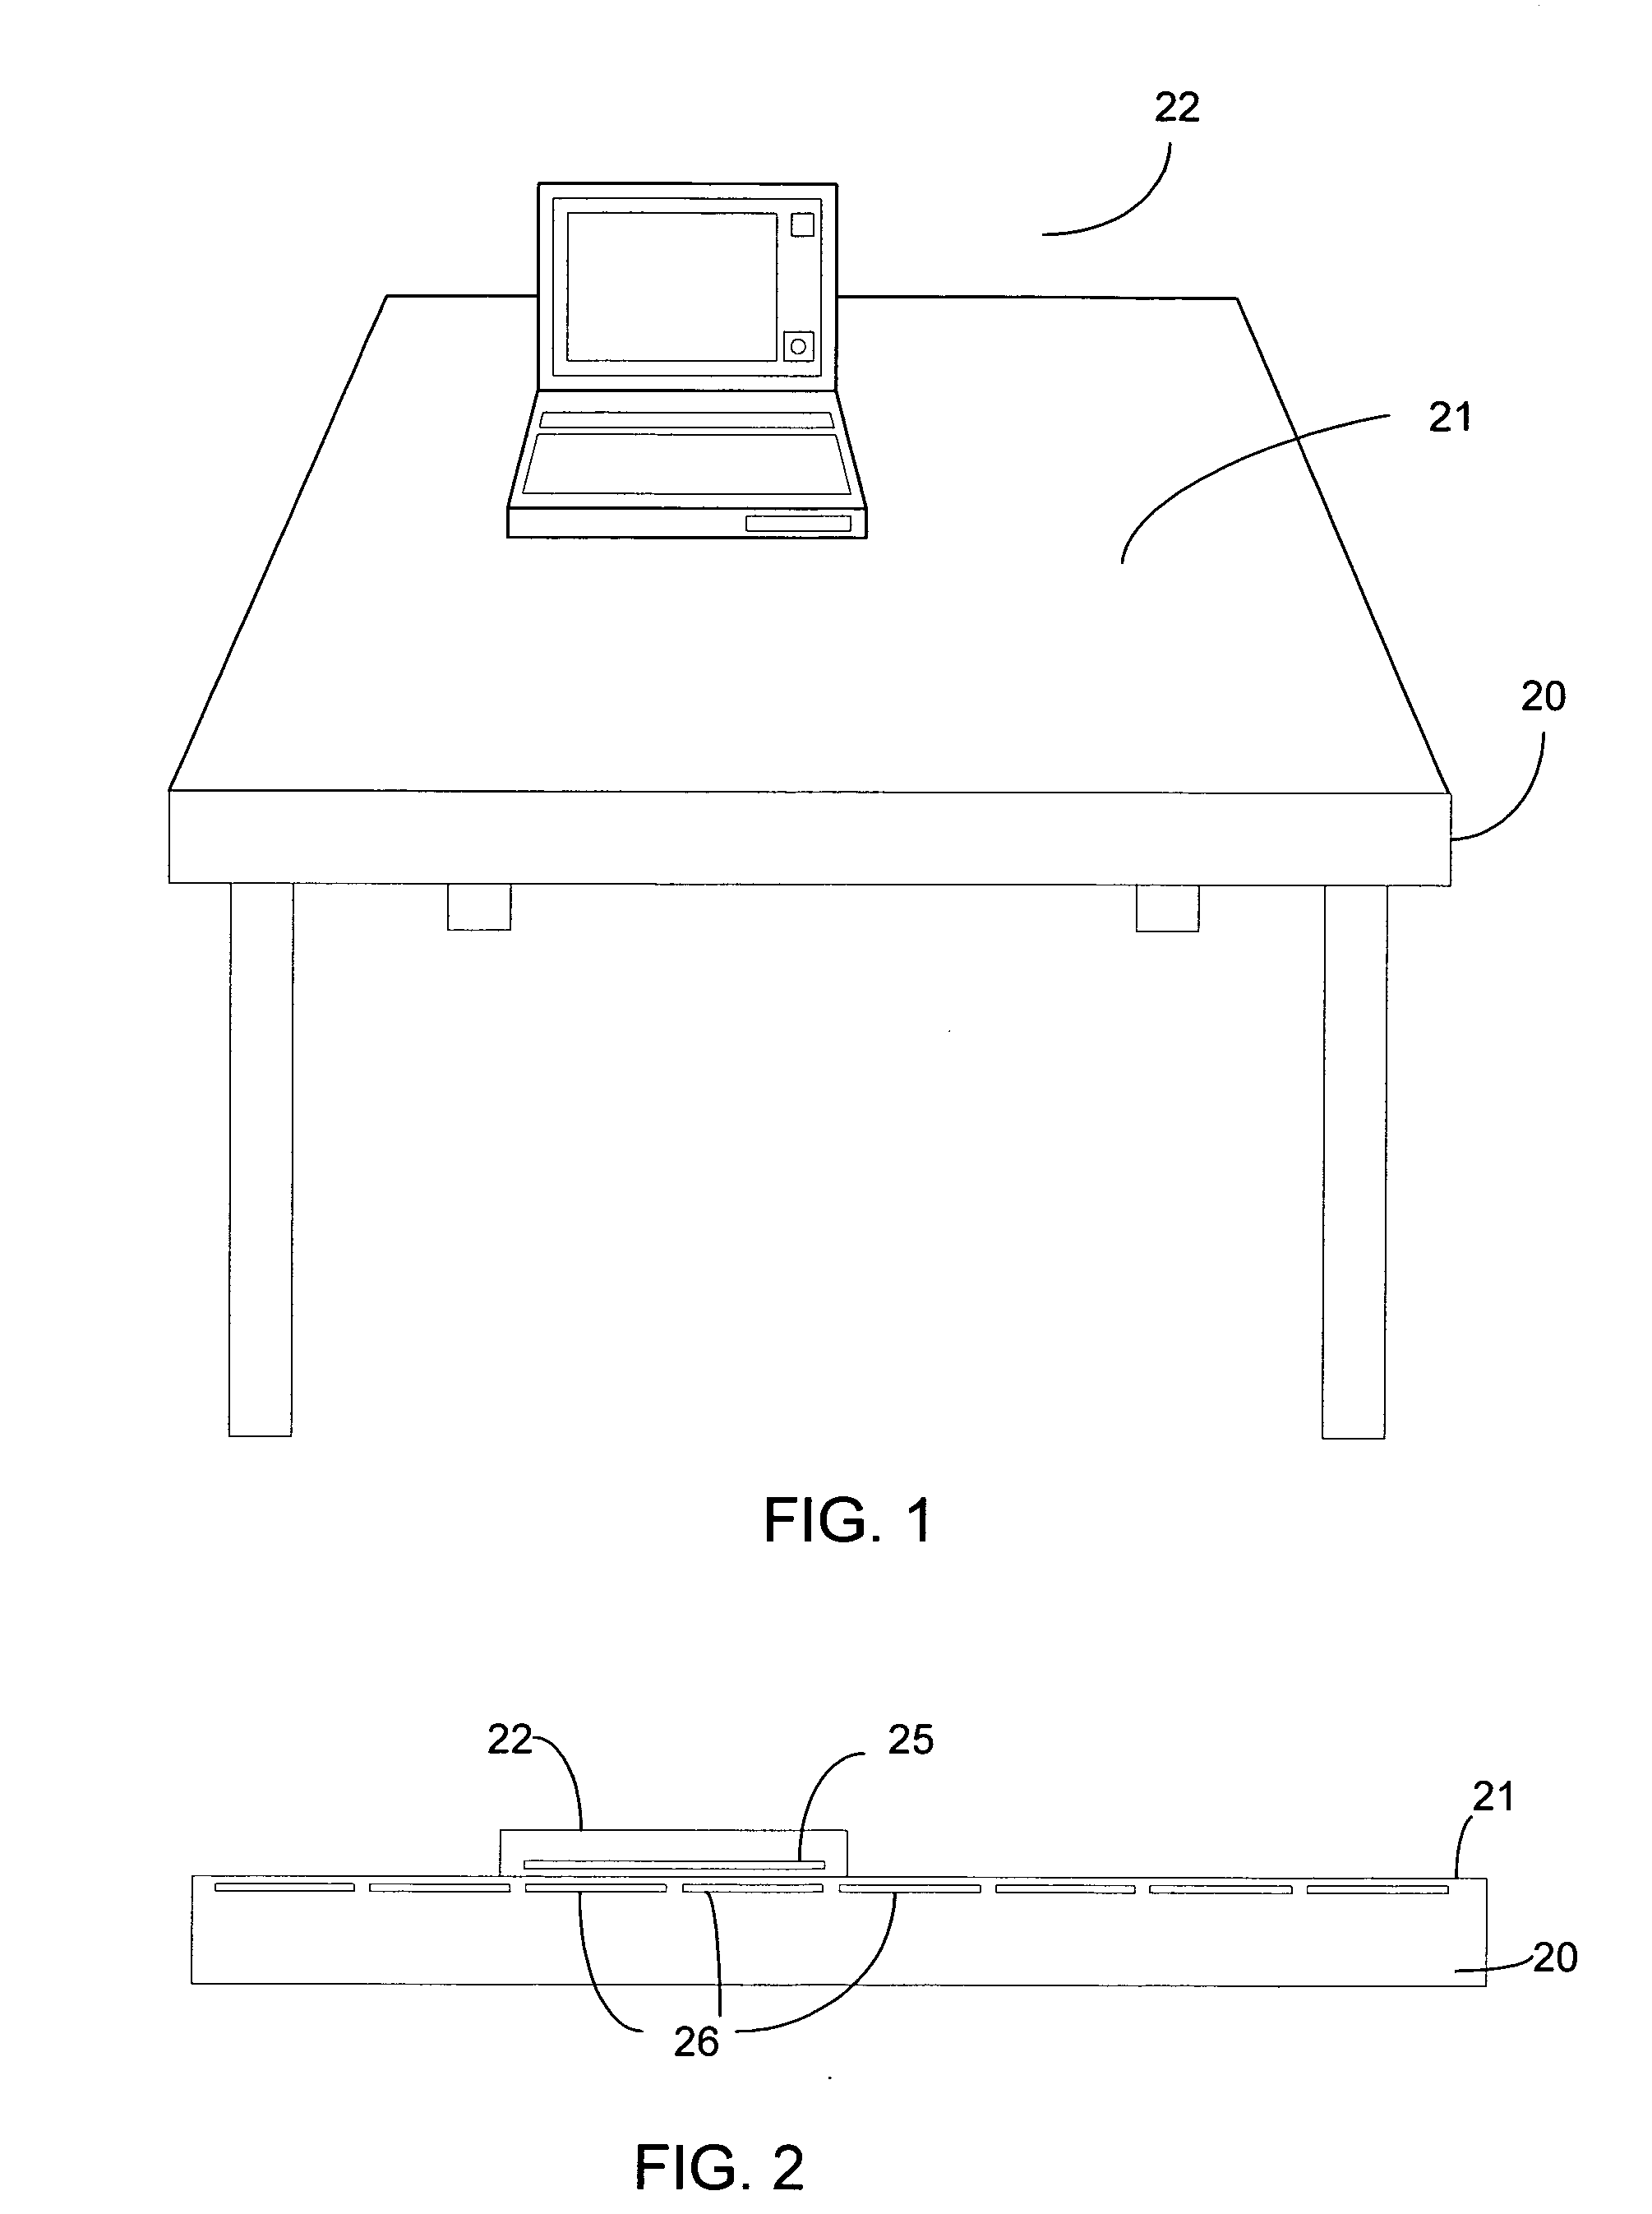 Inductive powering surface for powering portable devices